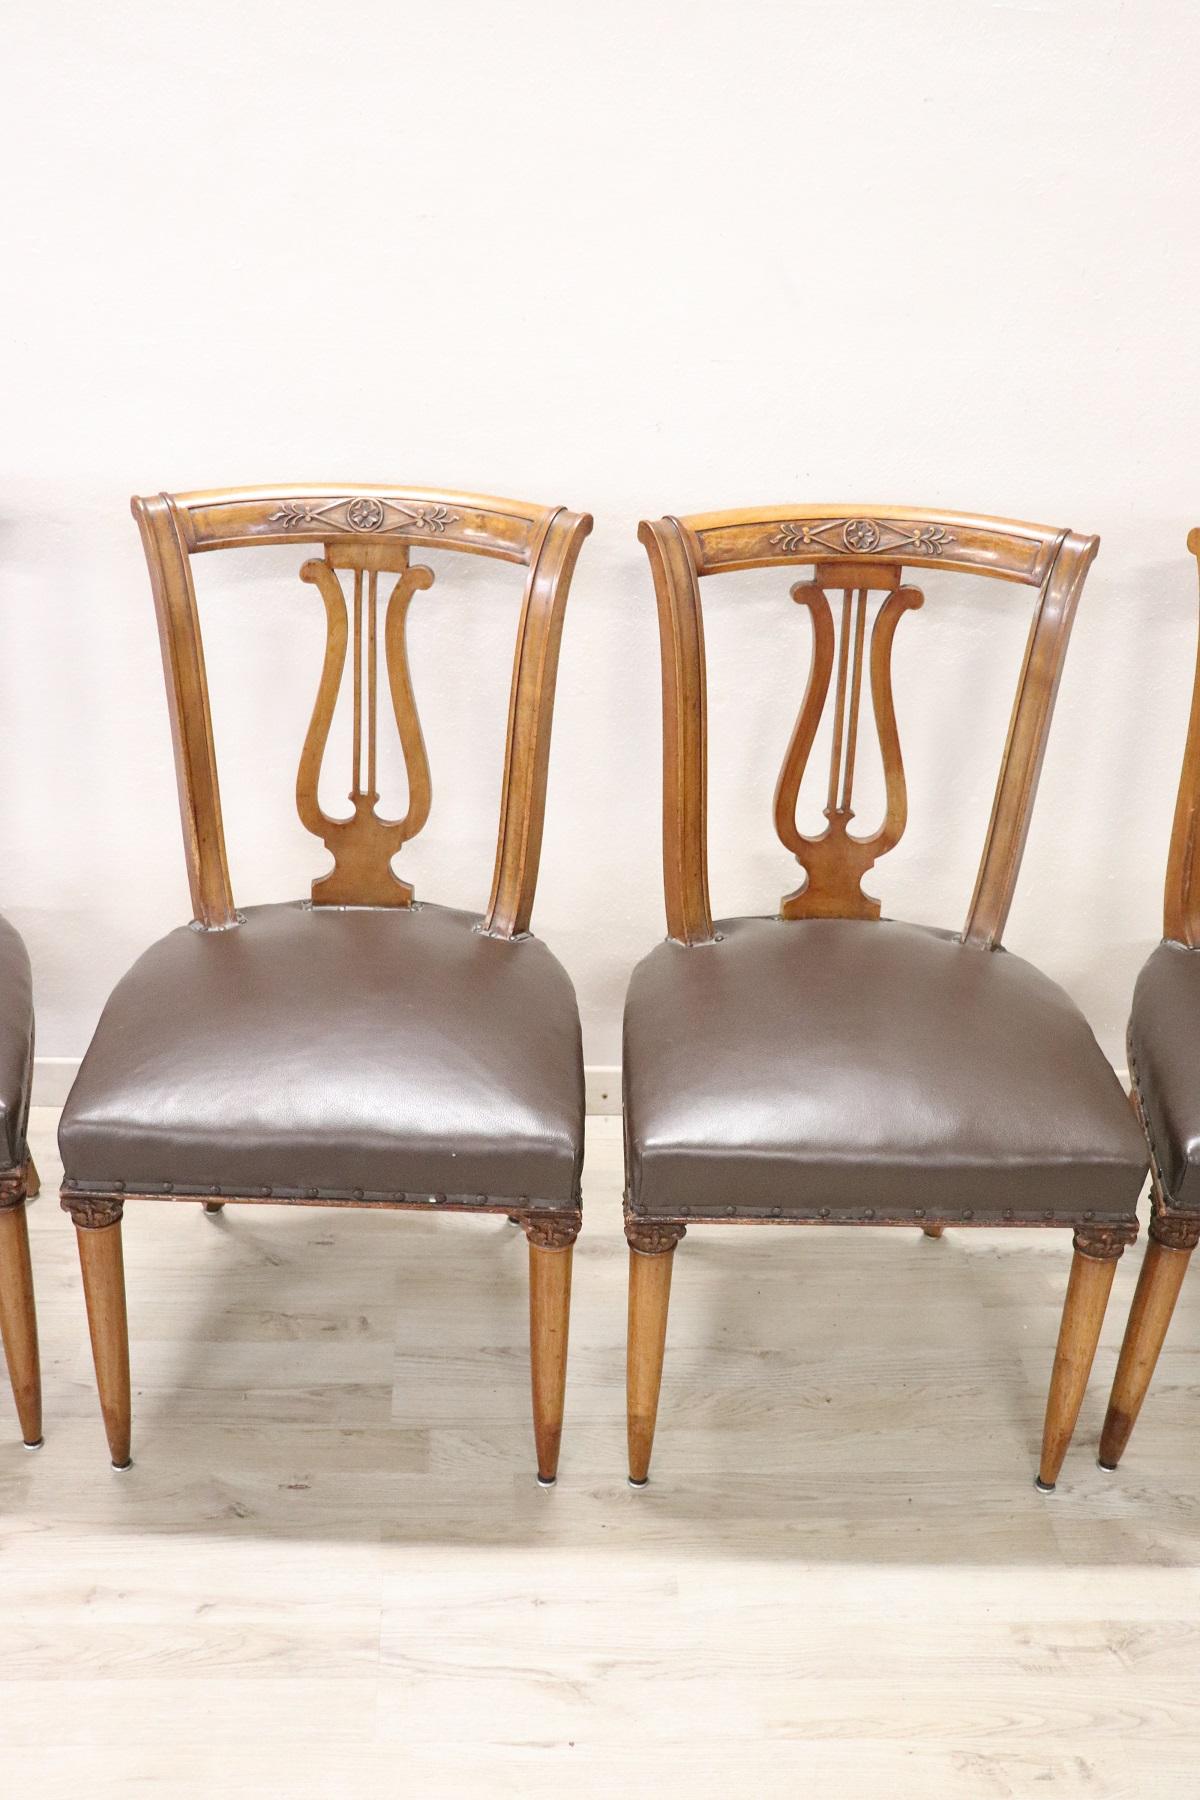 20th Century Italian Neoclassical Style Walnut Carved Set of Six Chairs (Neoklassisch)